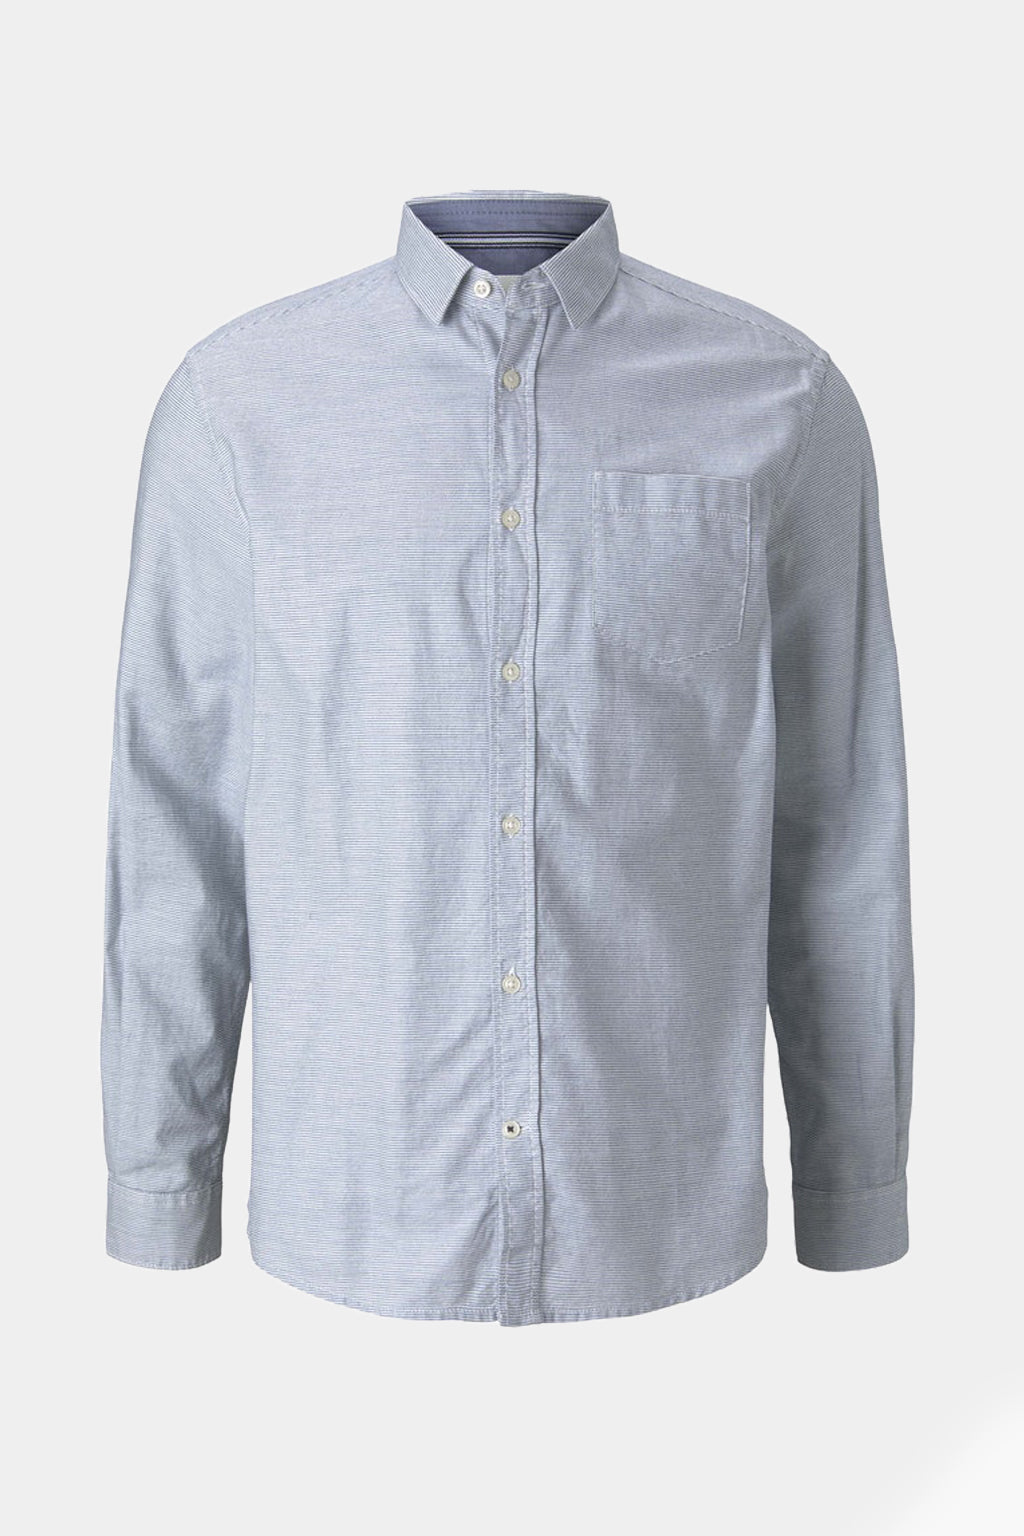 Tom Tailor - Striped Effect Shirt